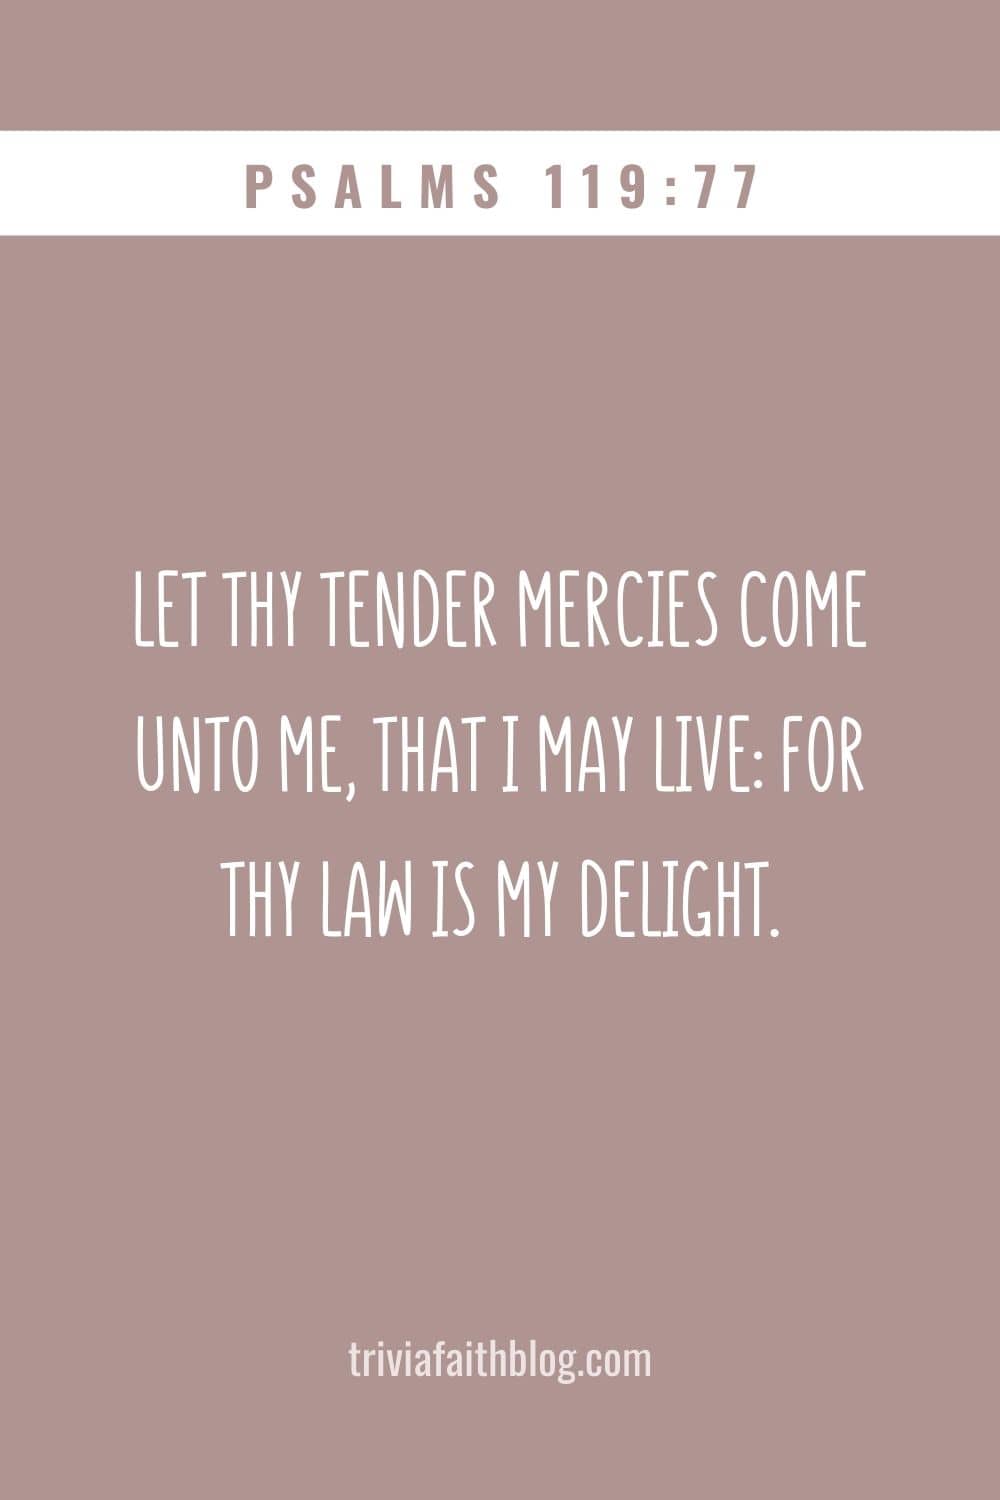 Let thy tender mercies come unto me, that I may live for thy law is my delight